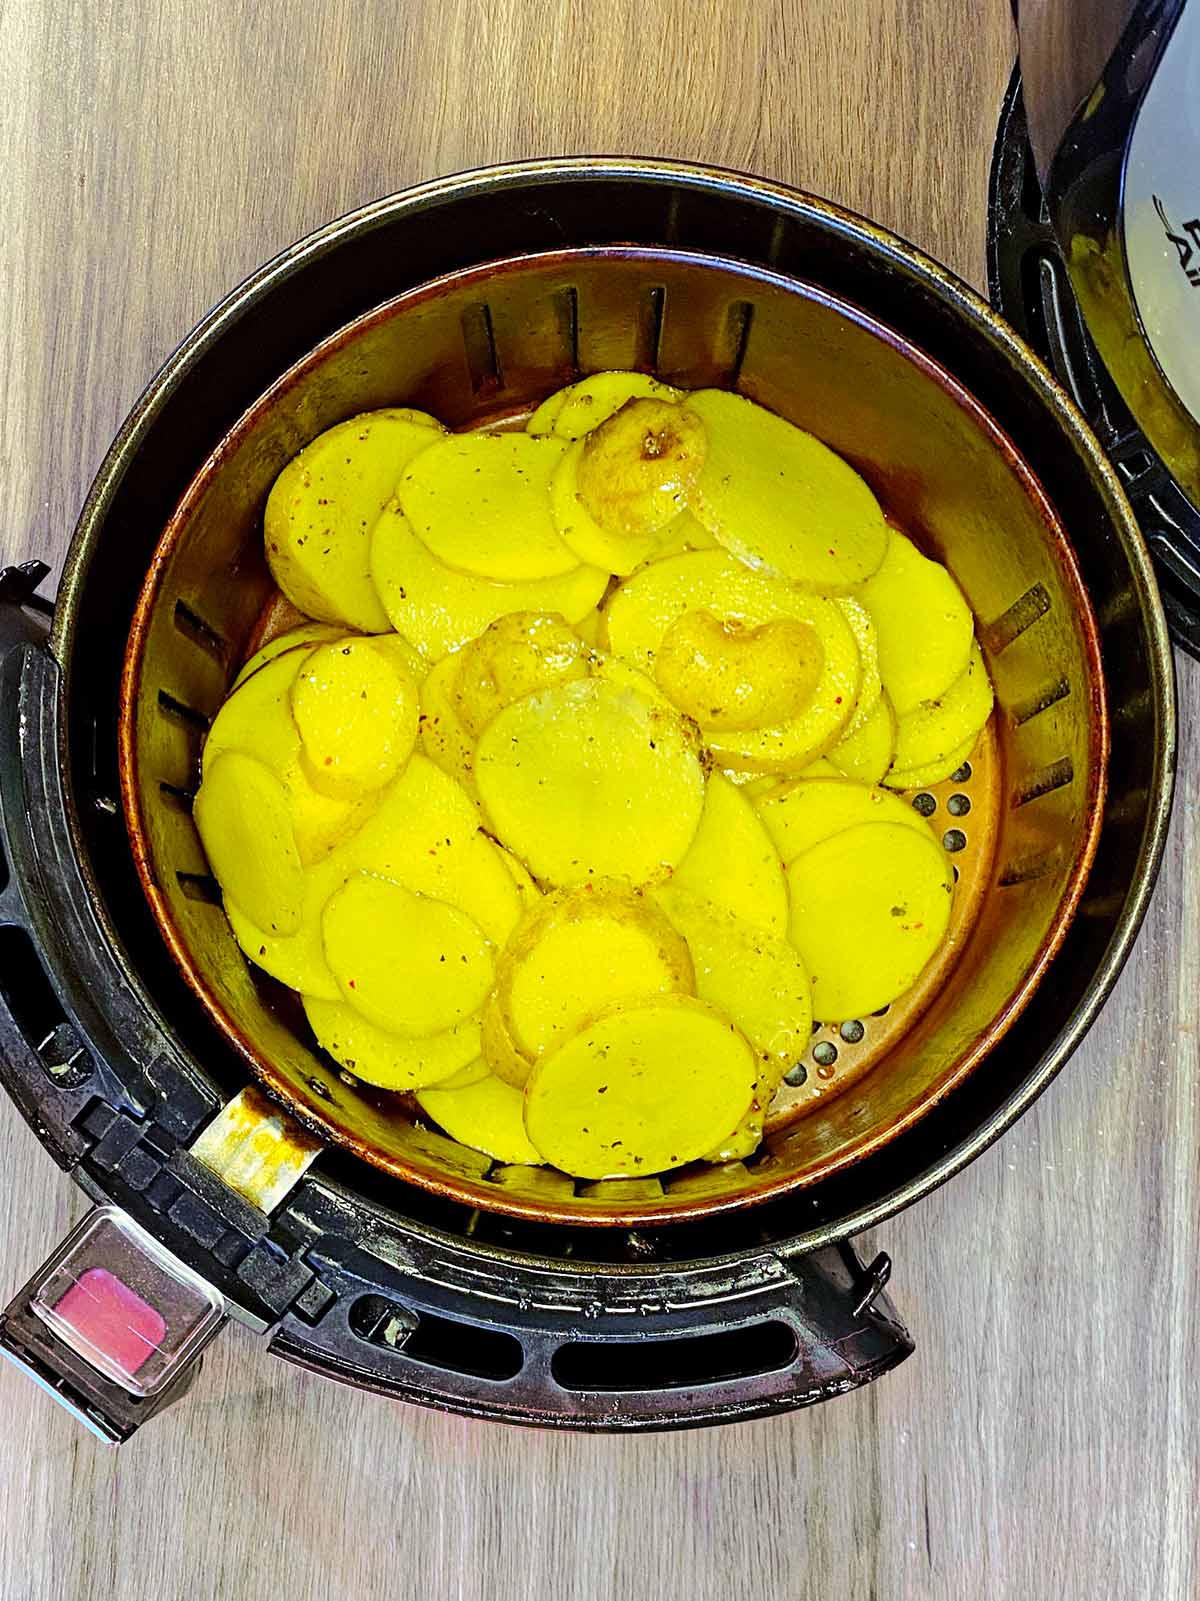 Uncooked potato slices in an air fryer basket.